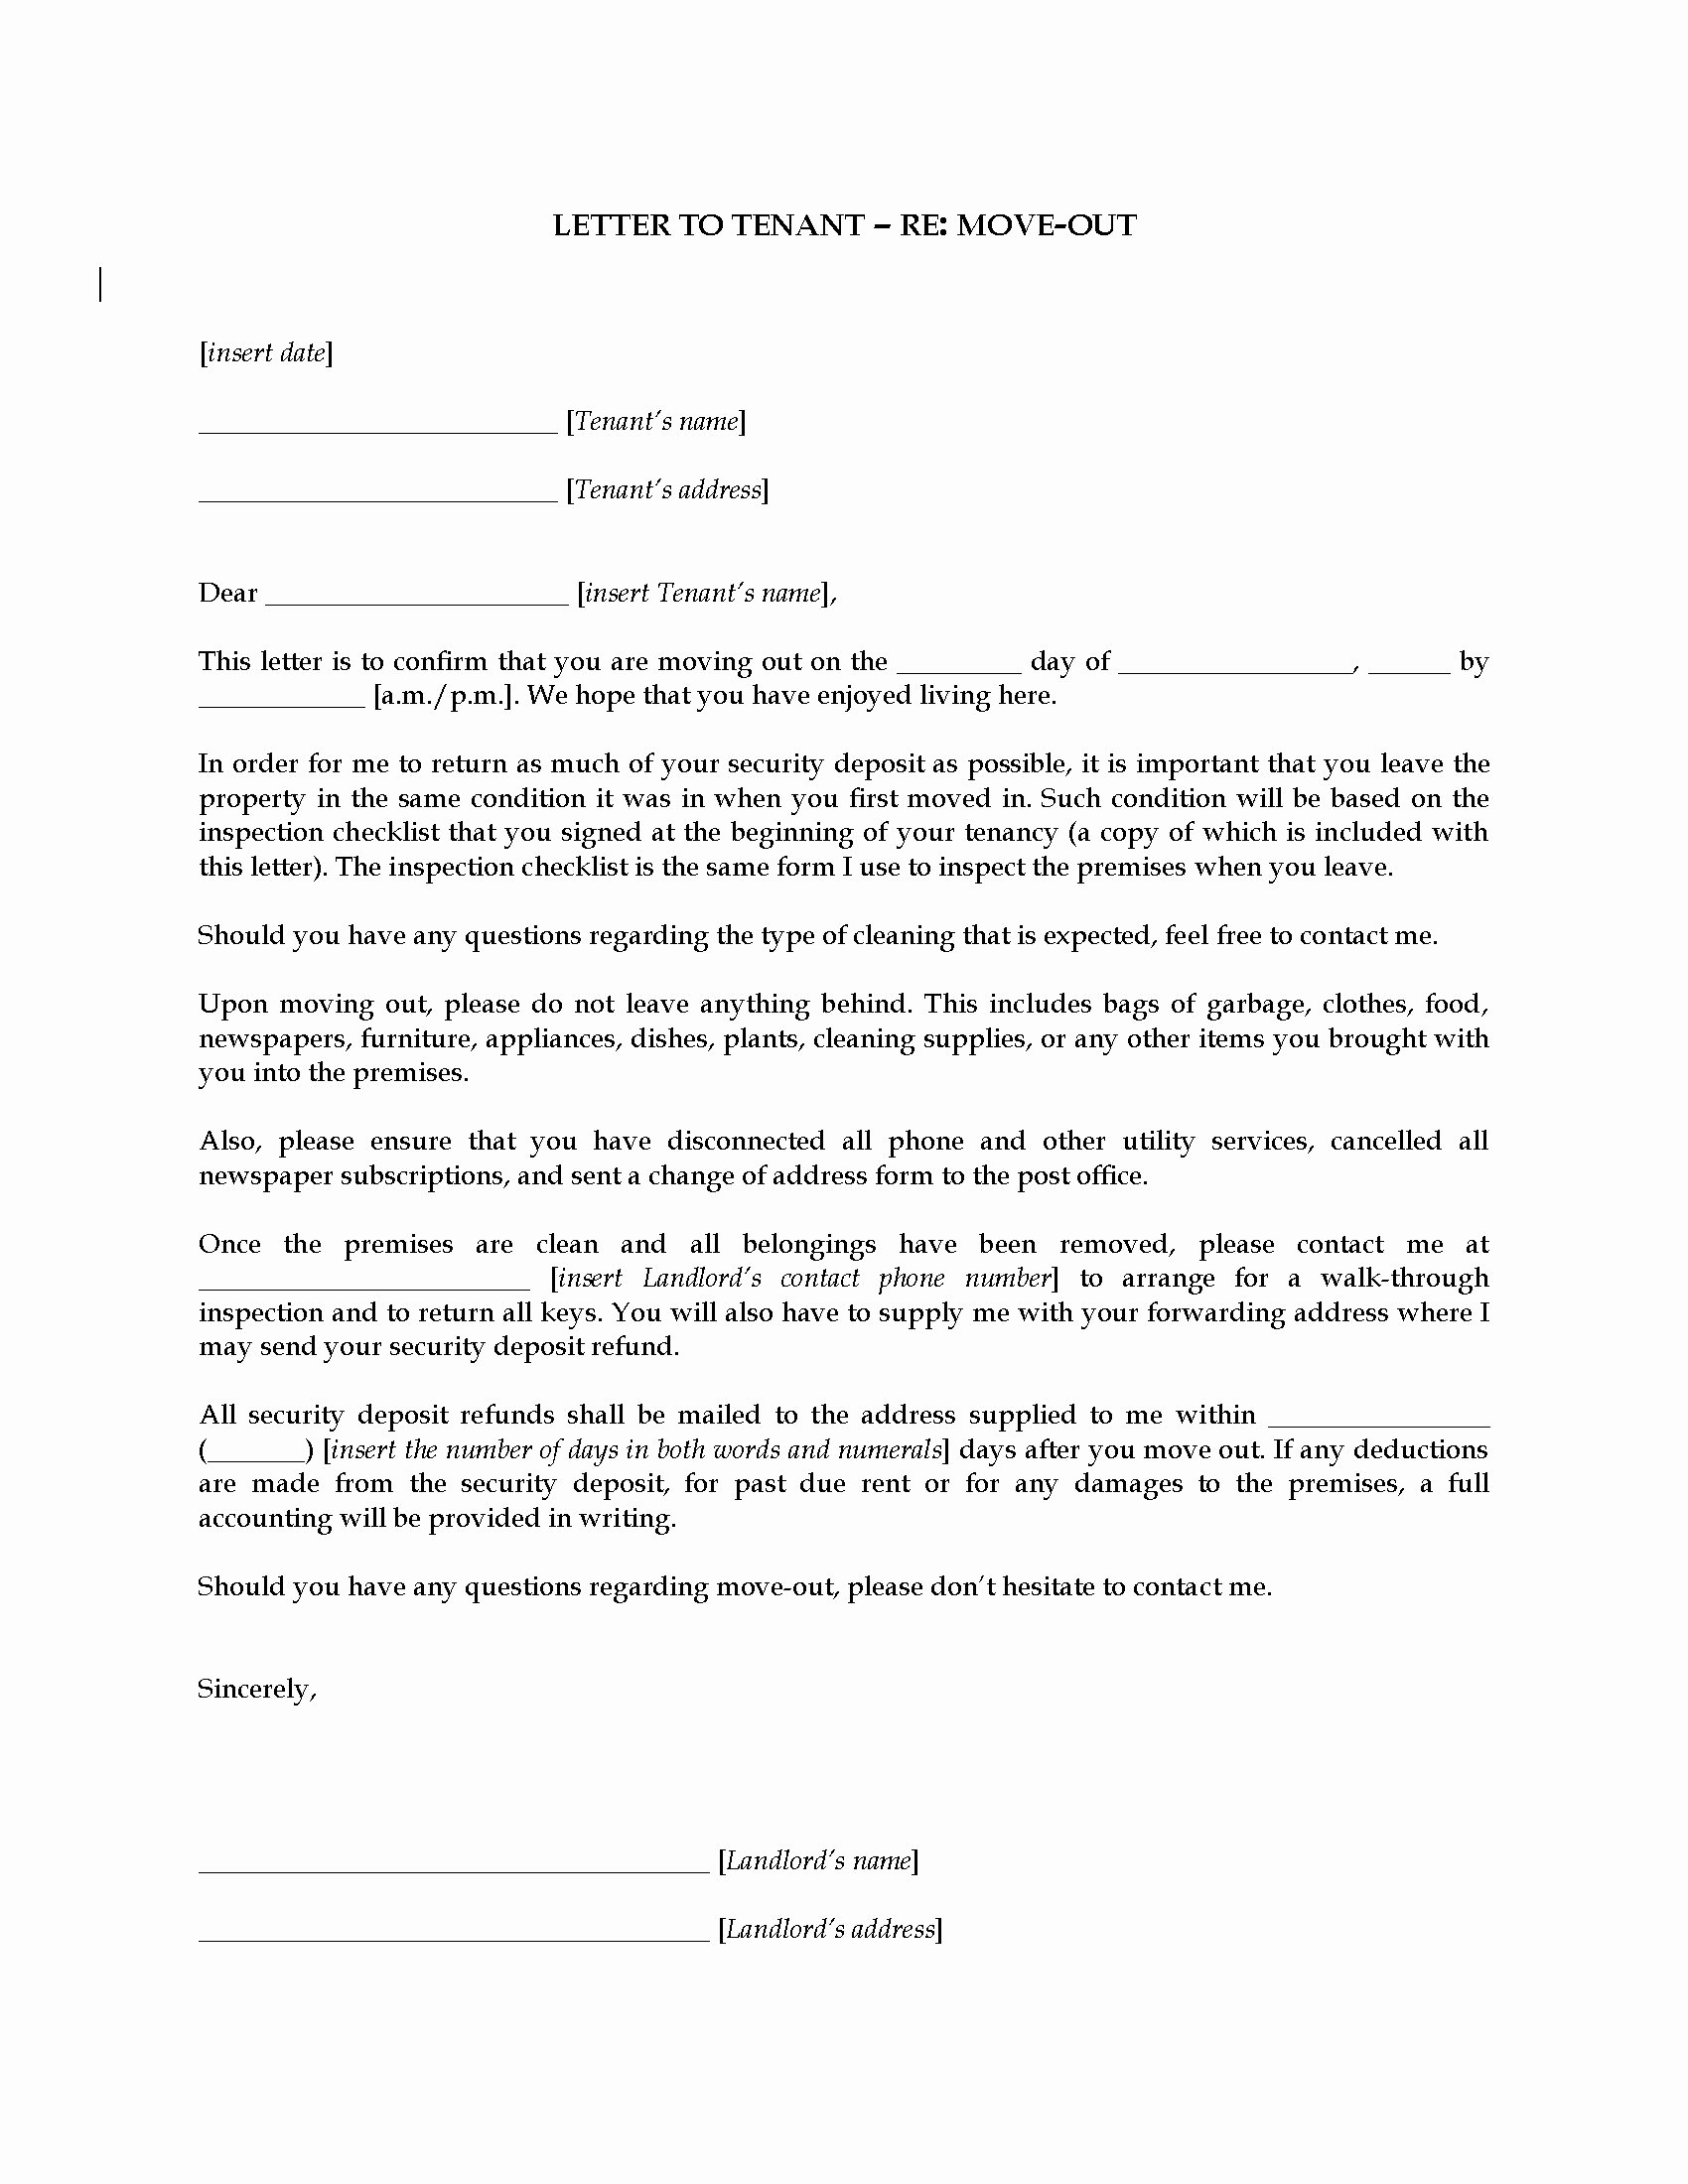 Move Out Agreement form Awesome Landlord Letter to Tenant Re Moving Out